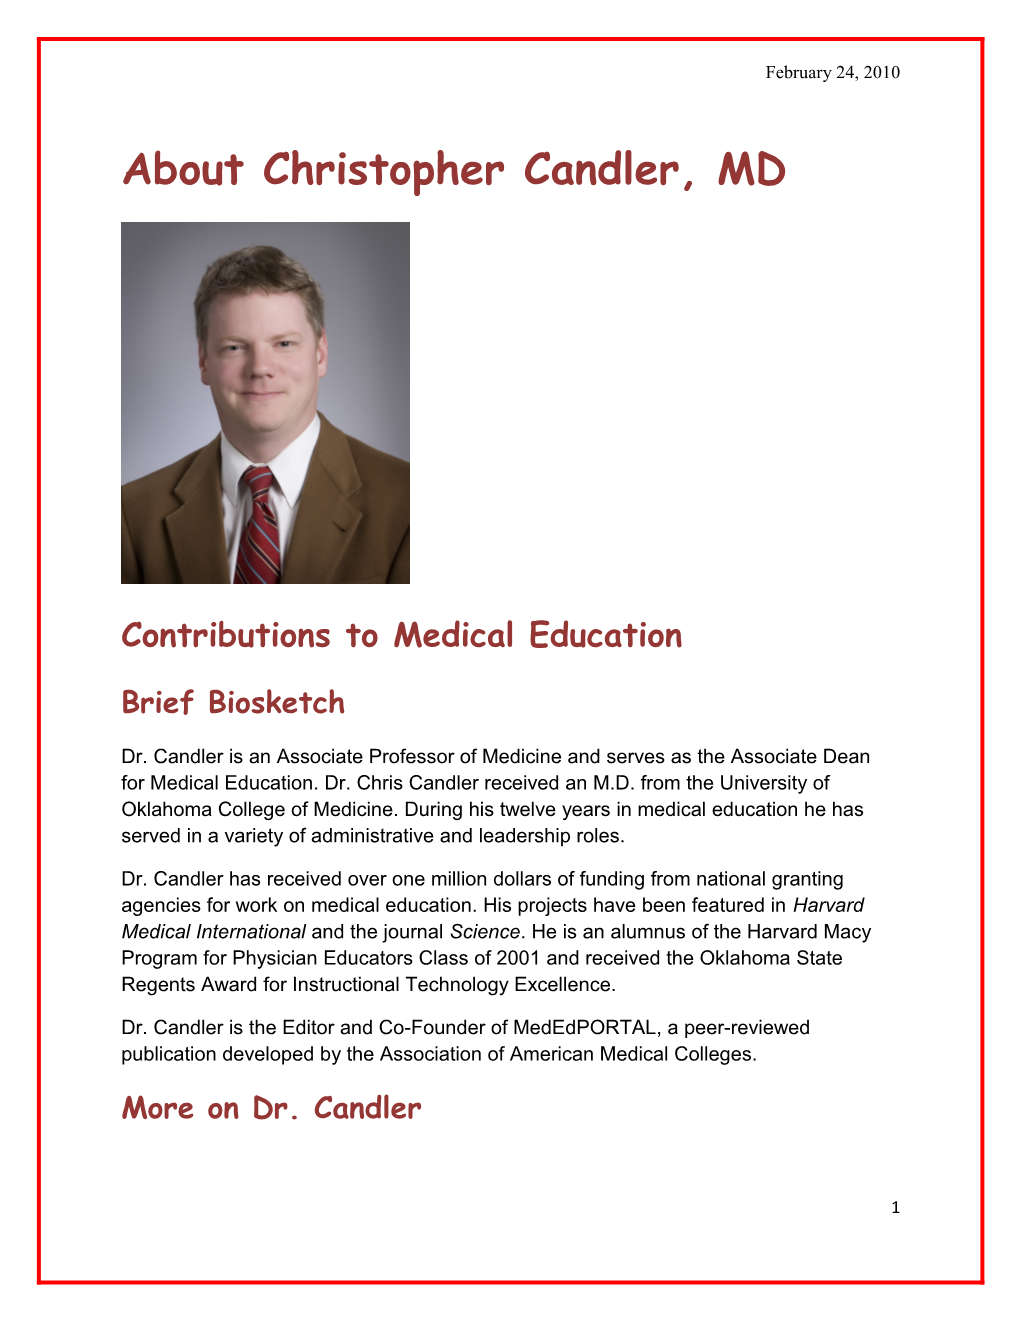 About Christopher Candler, MD